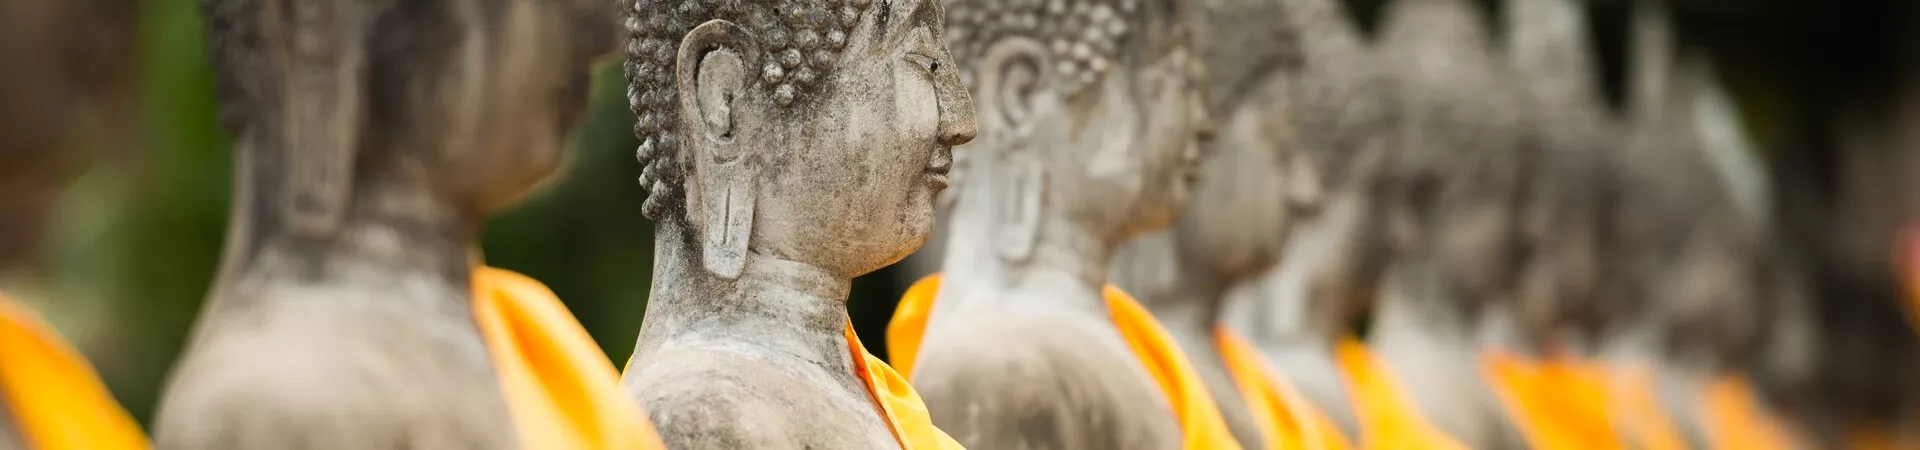 Old Buddha statues in temple in Ayutthaya, Thailand